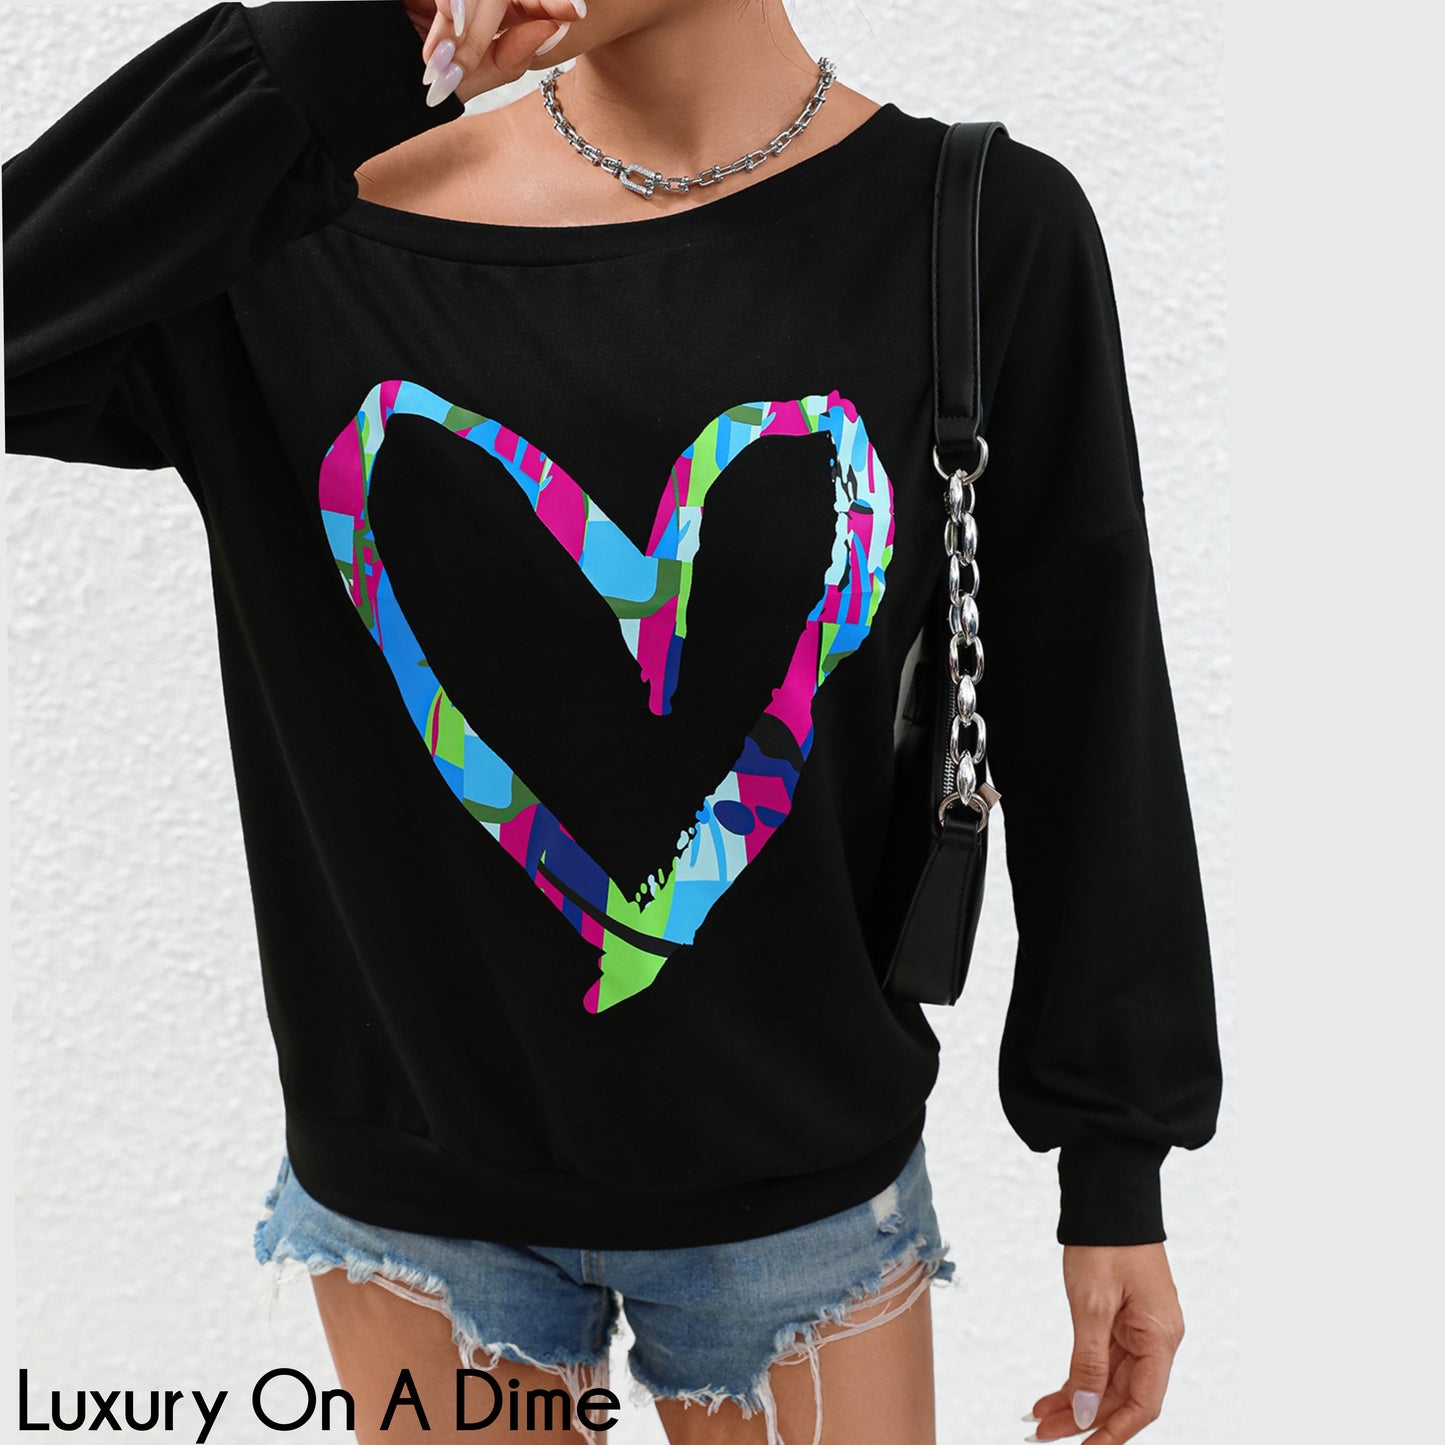 Colorful Heart Graphic Tee Long Sleeve Off Shoulder Boat Neck Pullover Shirt